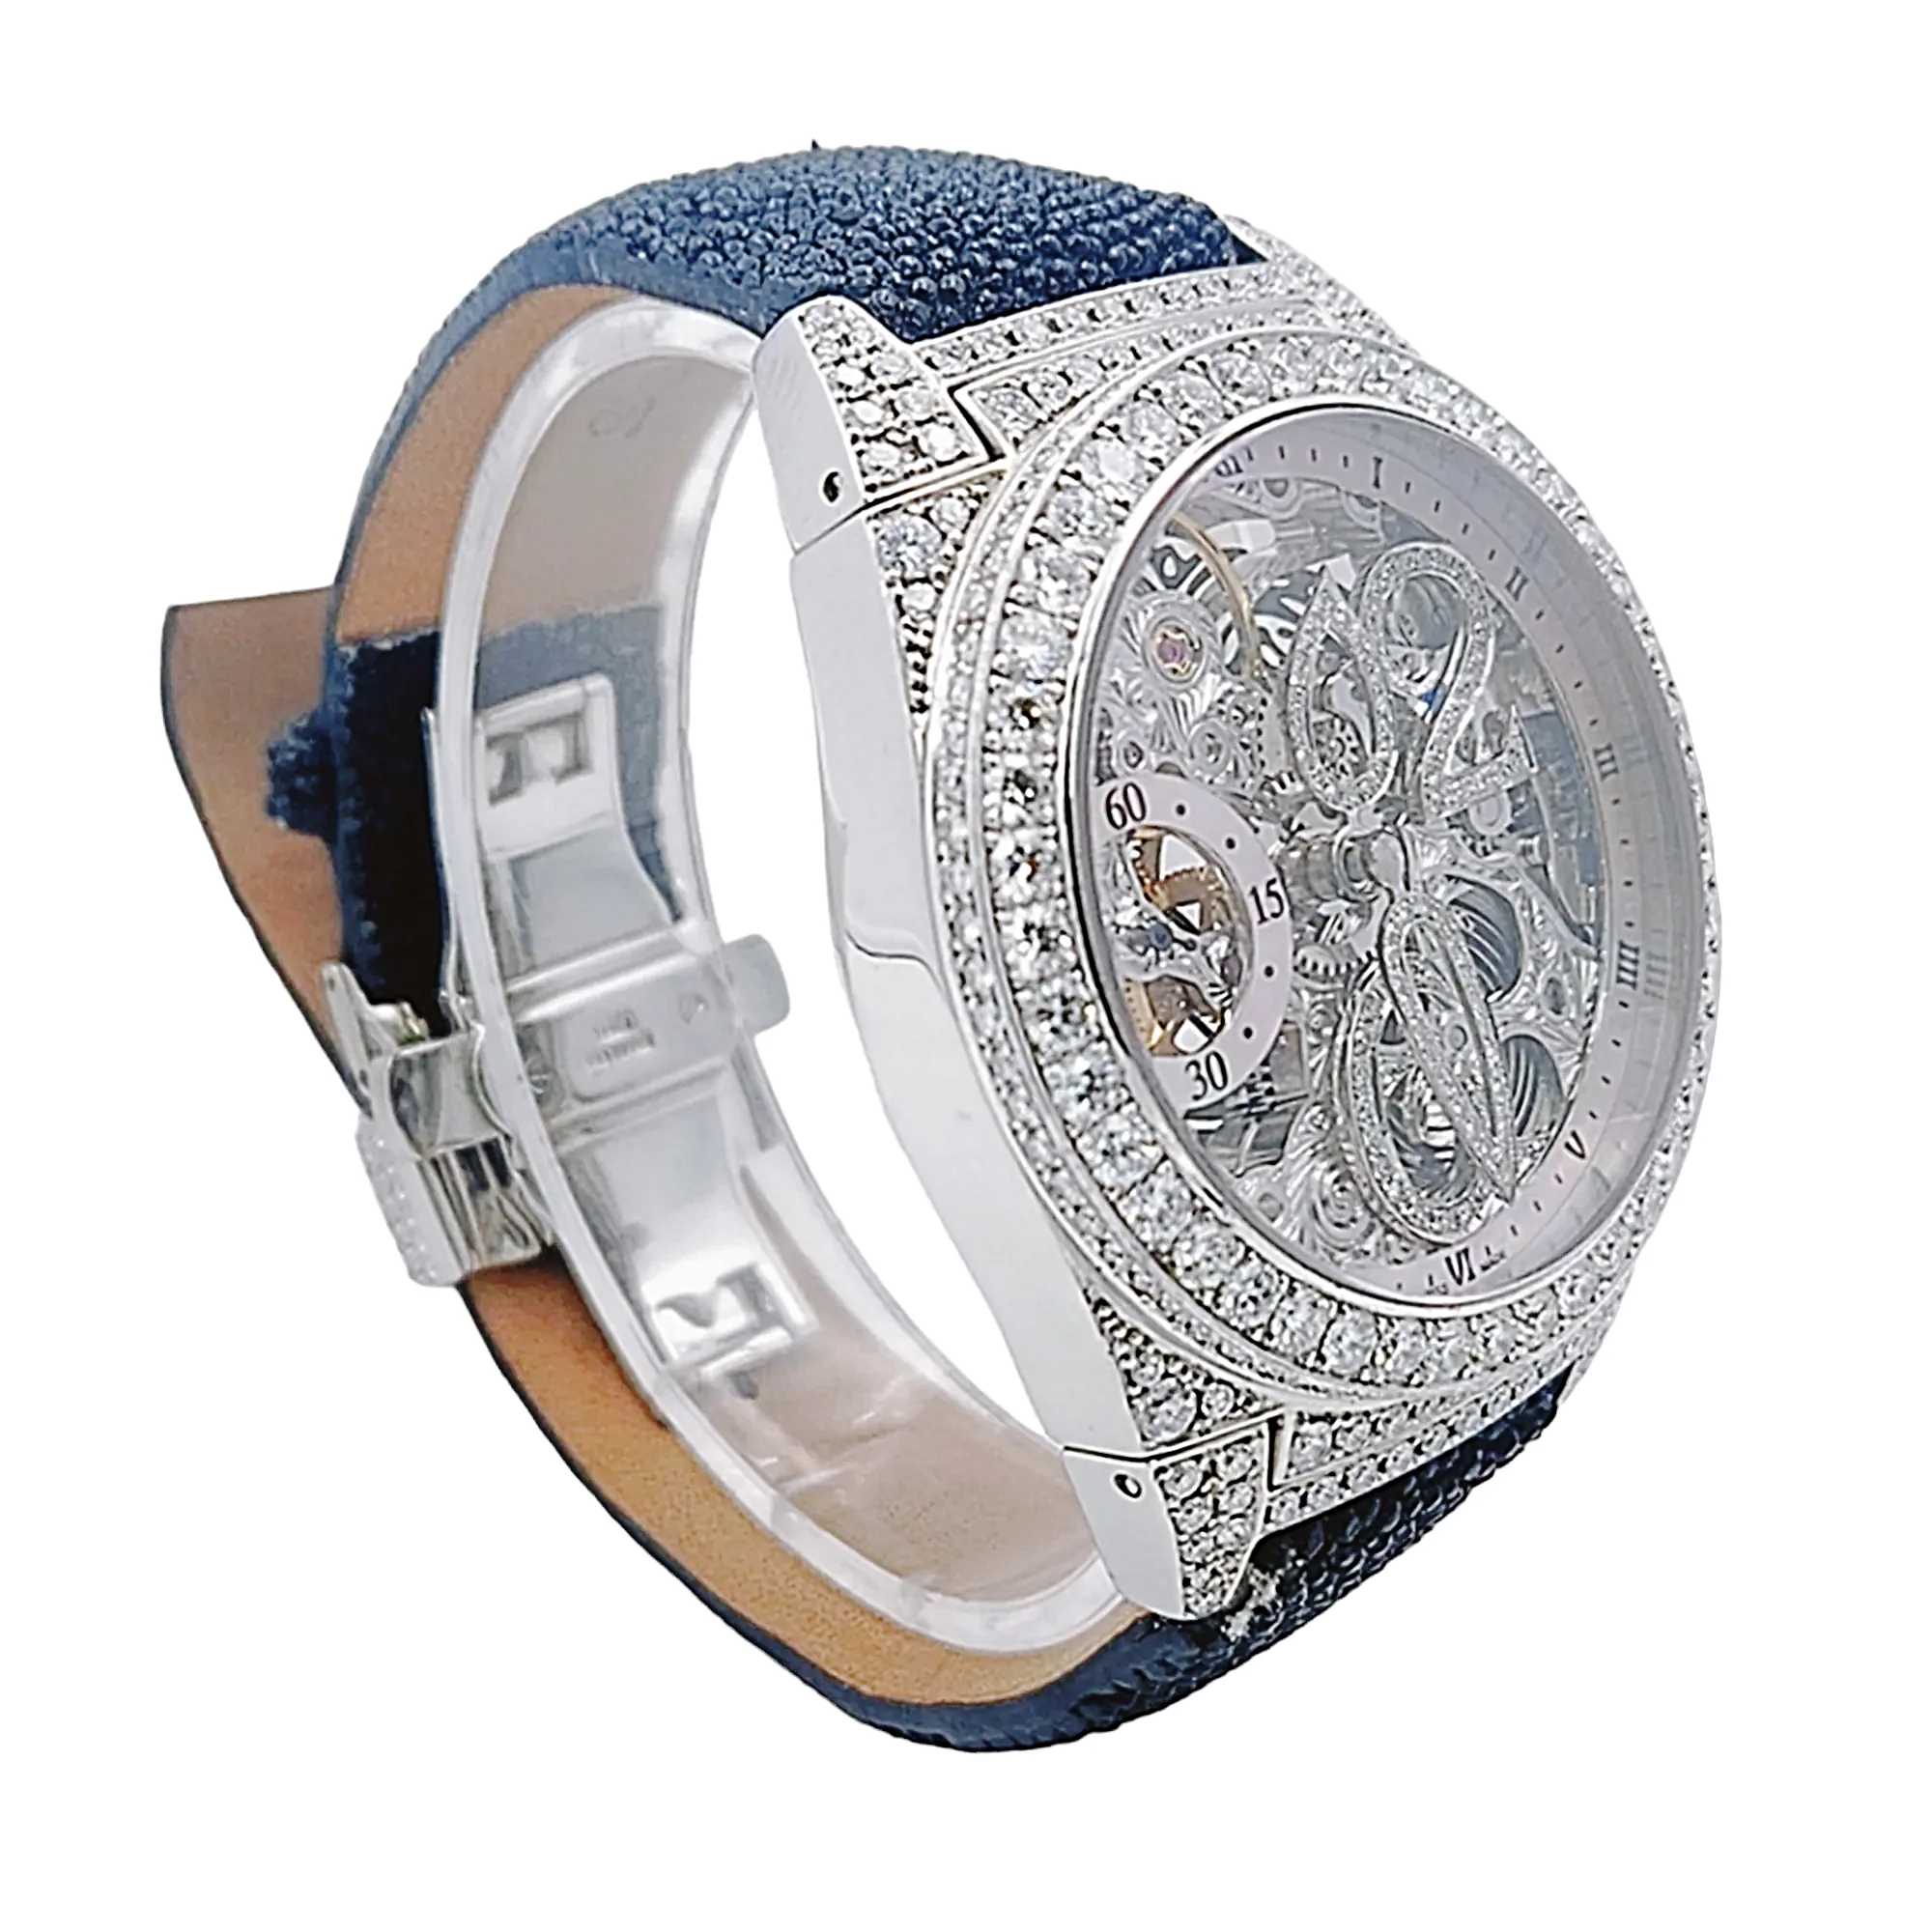 Men's D'Atlantis 44mm Full Diamond Skeleton Automatic Watch with Mother of Pearl Dial and Diamond Bezel. (Pre-Owned)